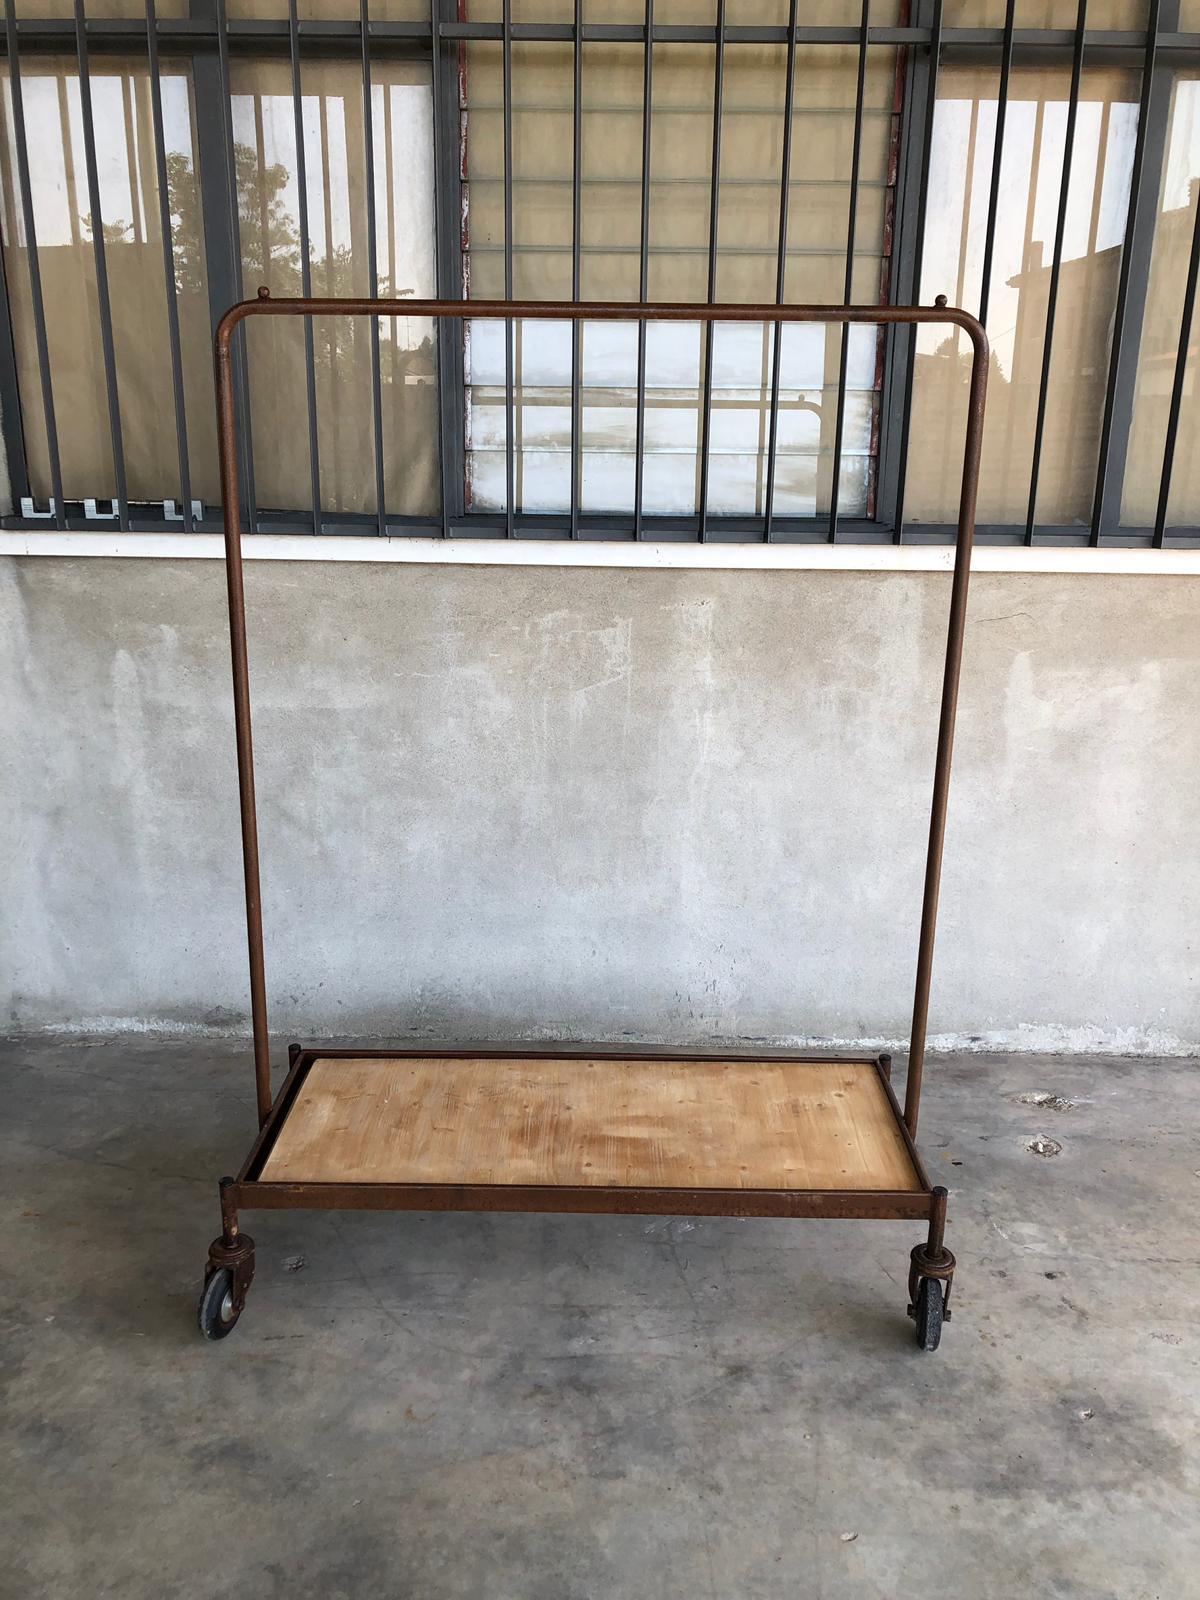 Clothes hanger industrial iron wheeled trolleys. Size: D 51 cm, W 120 cm. Quantity available n 6

Industrial iron wheeled trays with or without wooden shelves. From Italy from mid century period.
Trolleys are made of industrial tubular iron with net